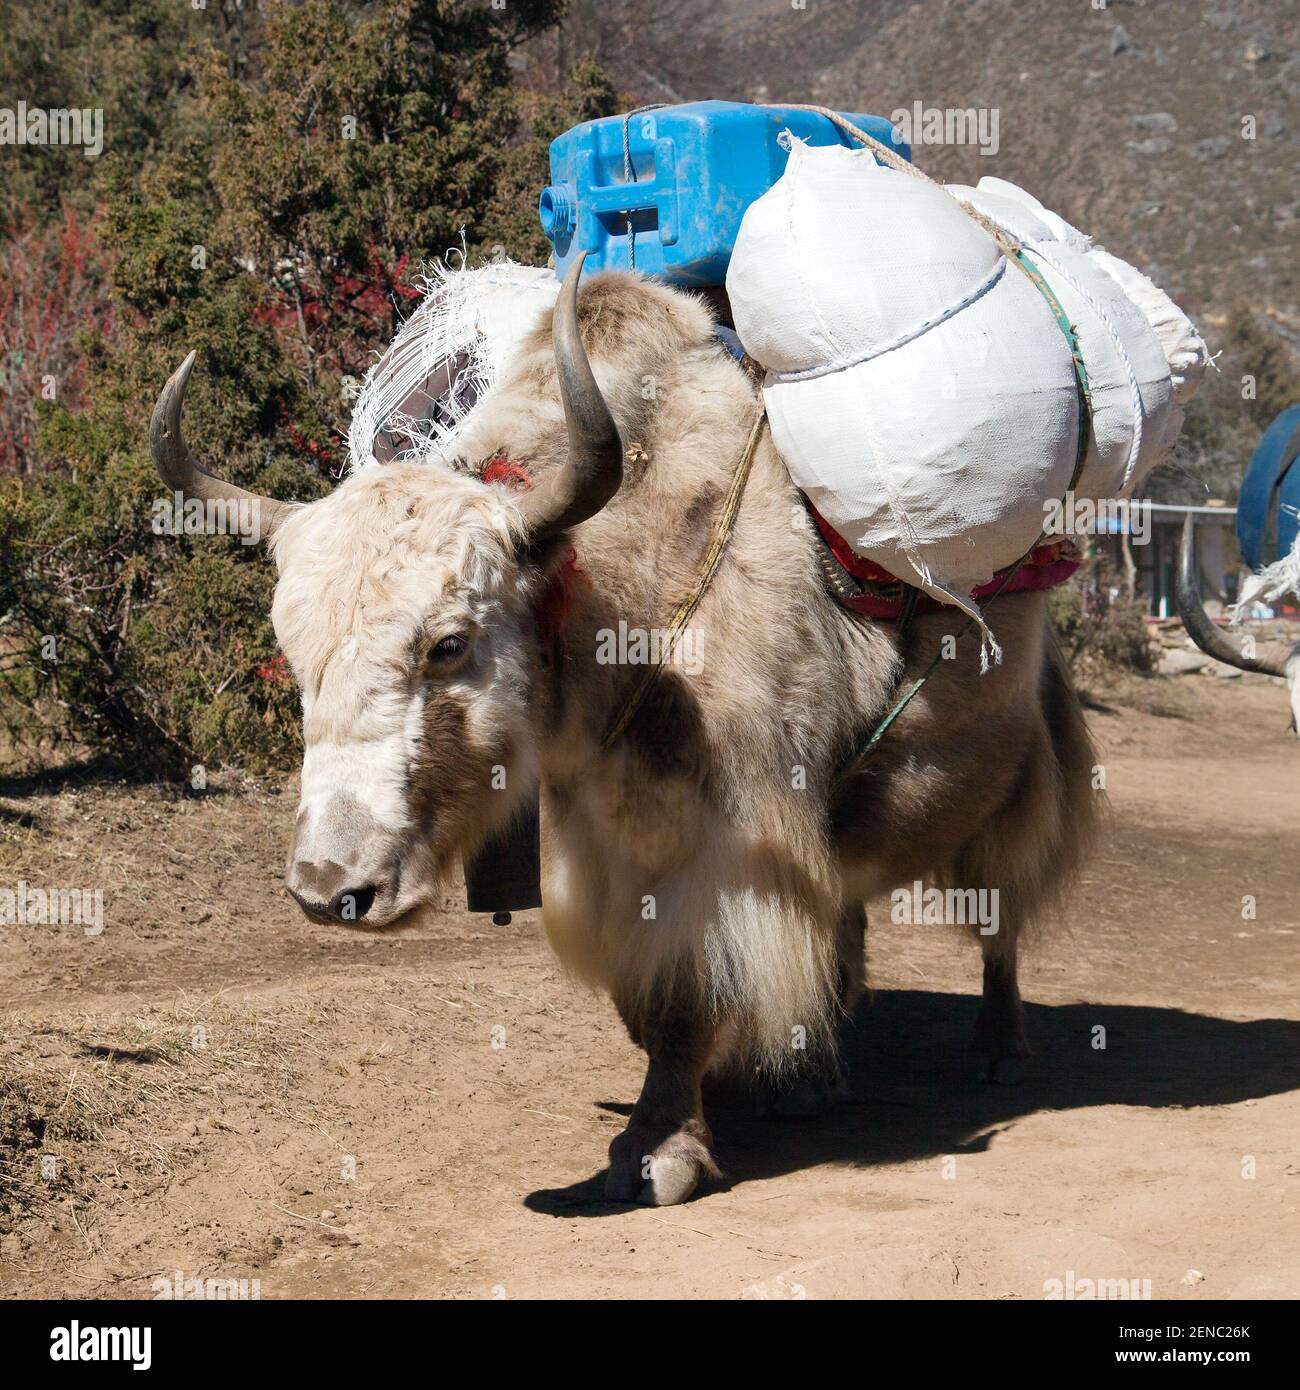 White Yak - bos grunniens or bos mutus - on the way to Everest base camp and mount Pumo ri - Nepal Stock Photo